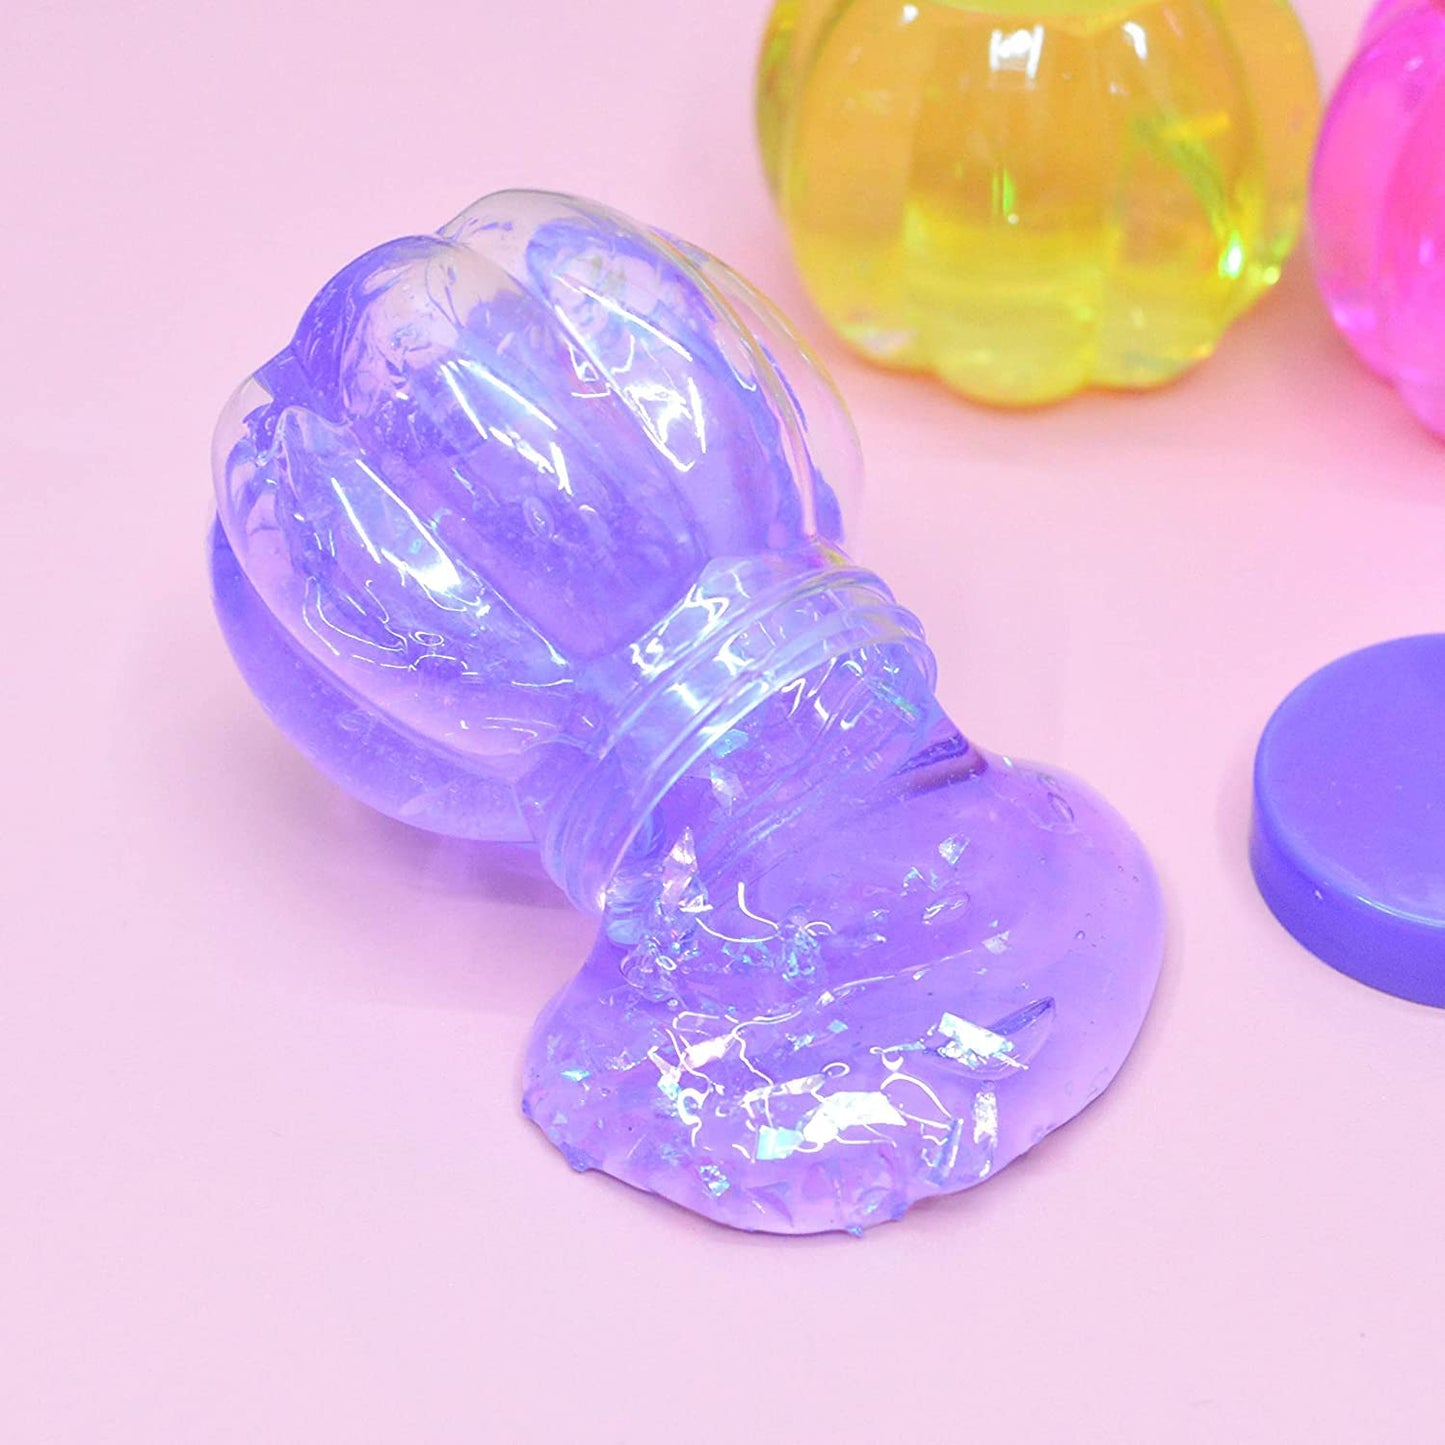 Crystal Clear Clay Jelly Slime Mud for Kids Non-Toxic Substance